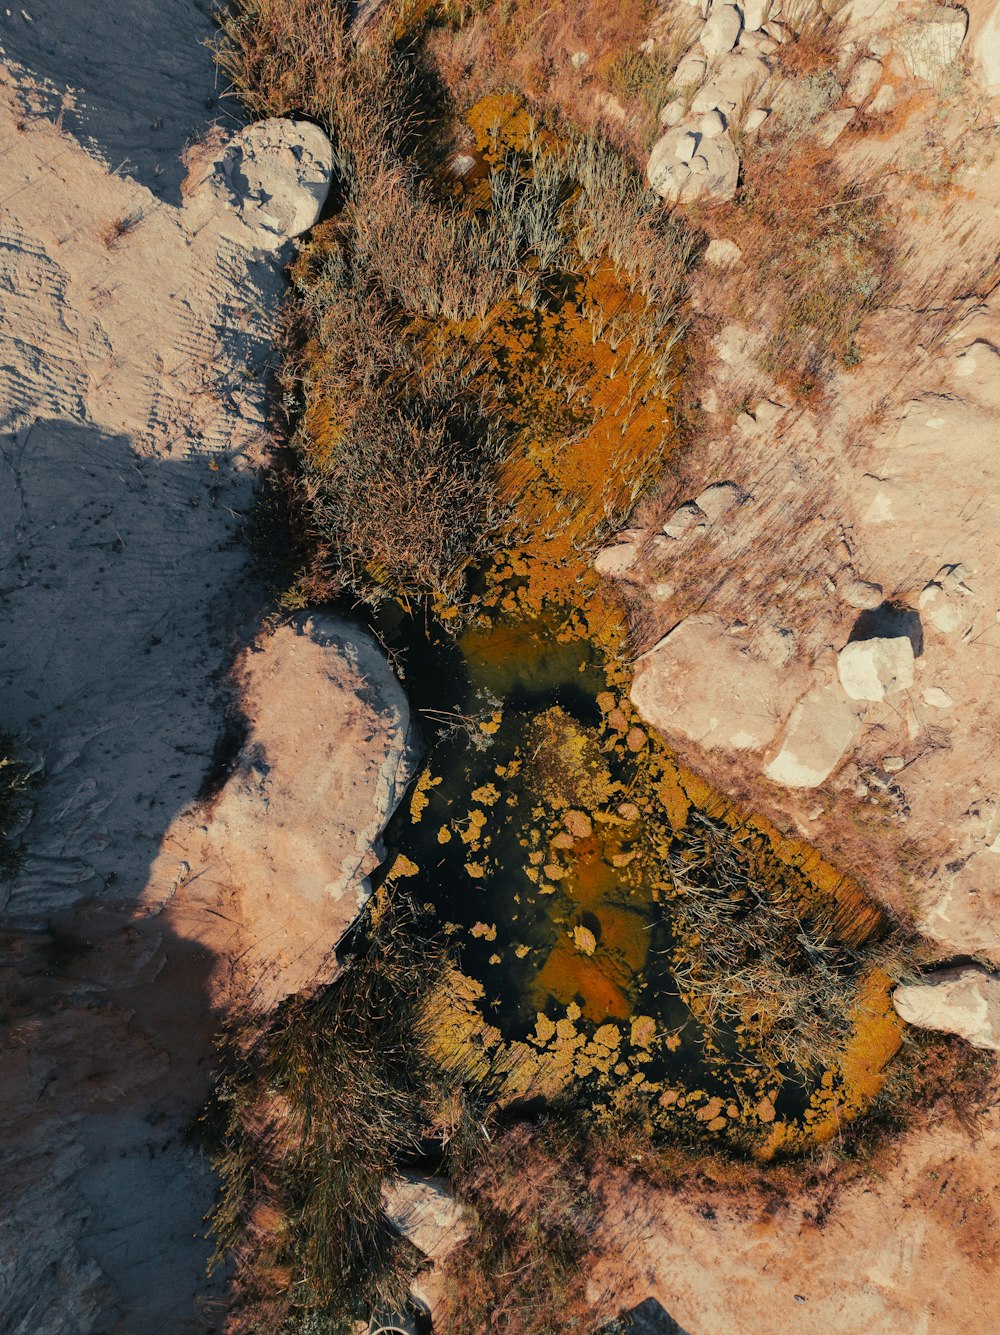 an aerial view of a small pond surrounded by rocks